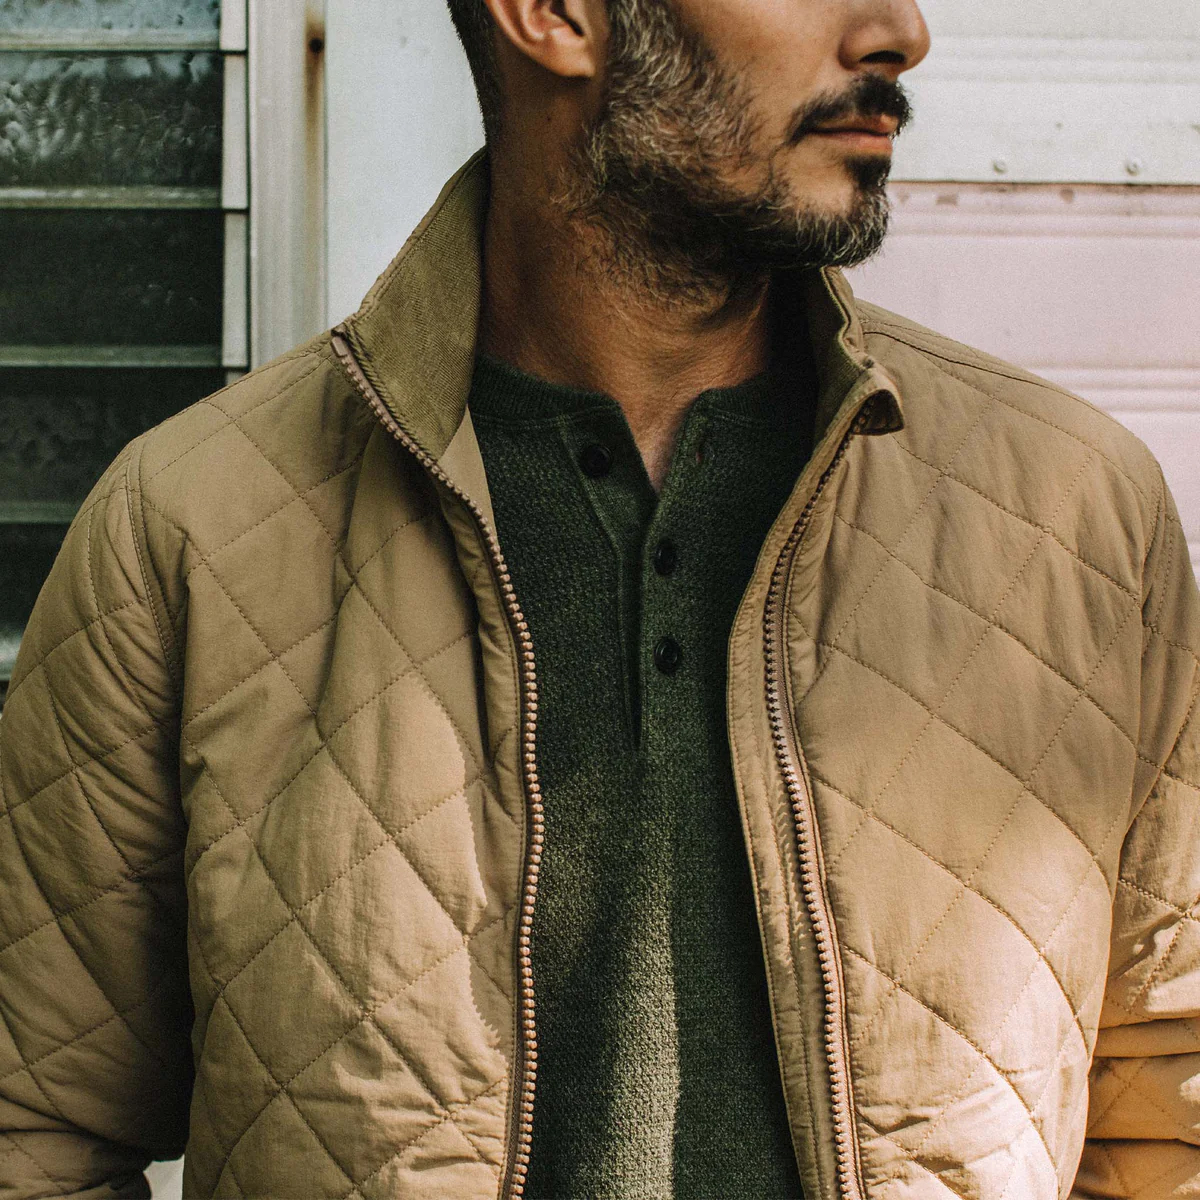 A model wearing a Taylor Stitch sustainable jacket for men